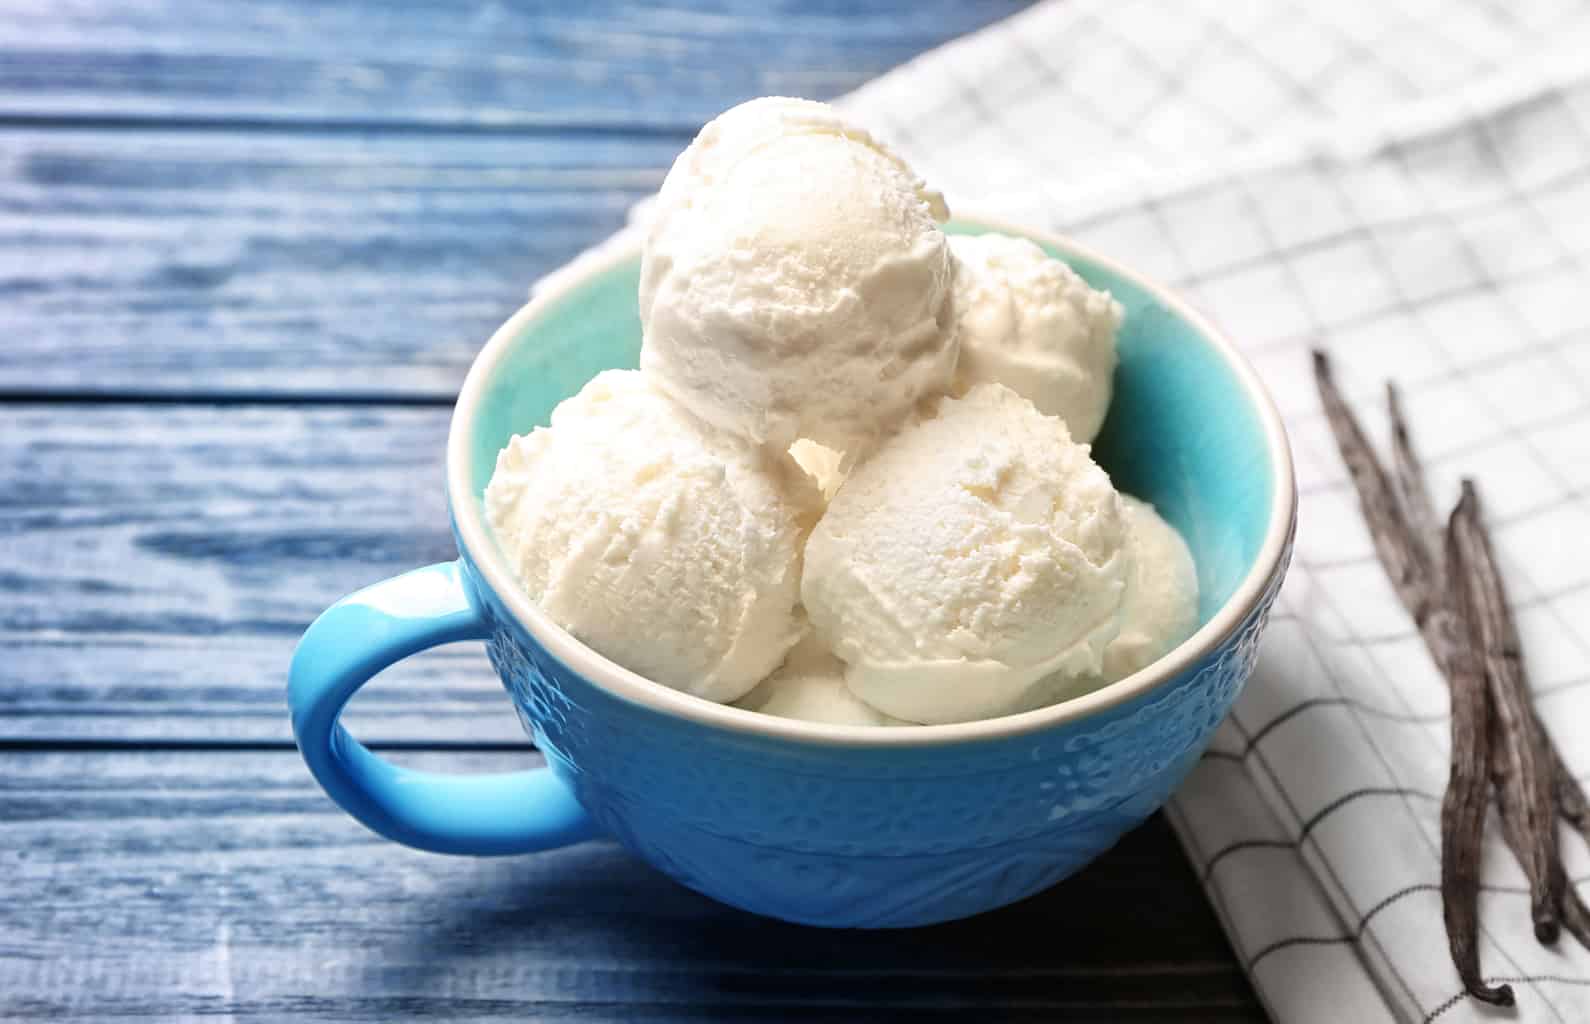 The ice cream cure works -- try it